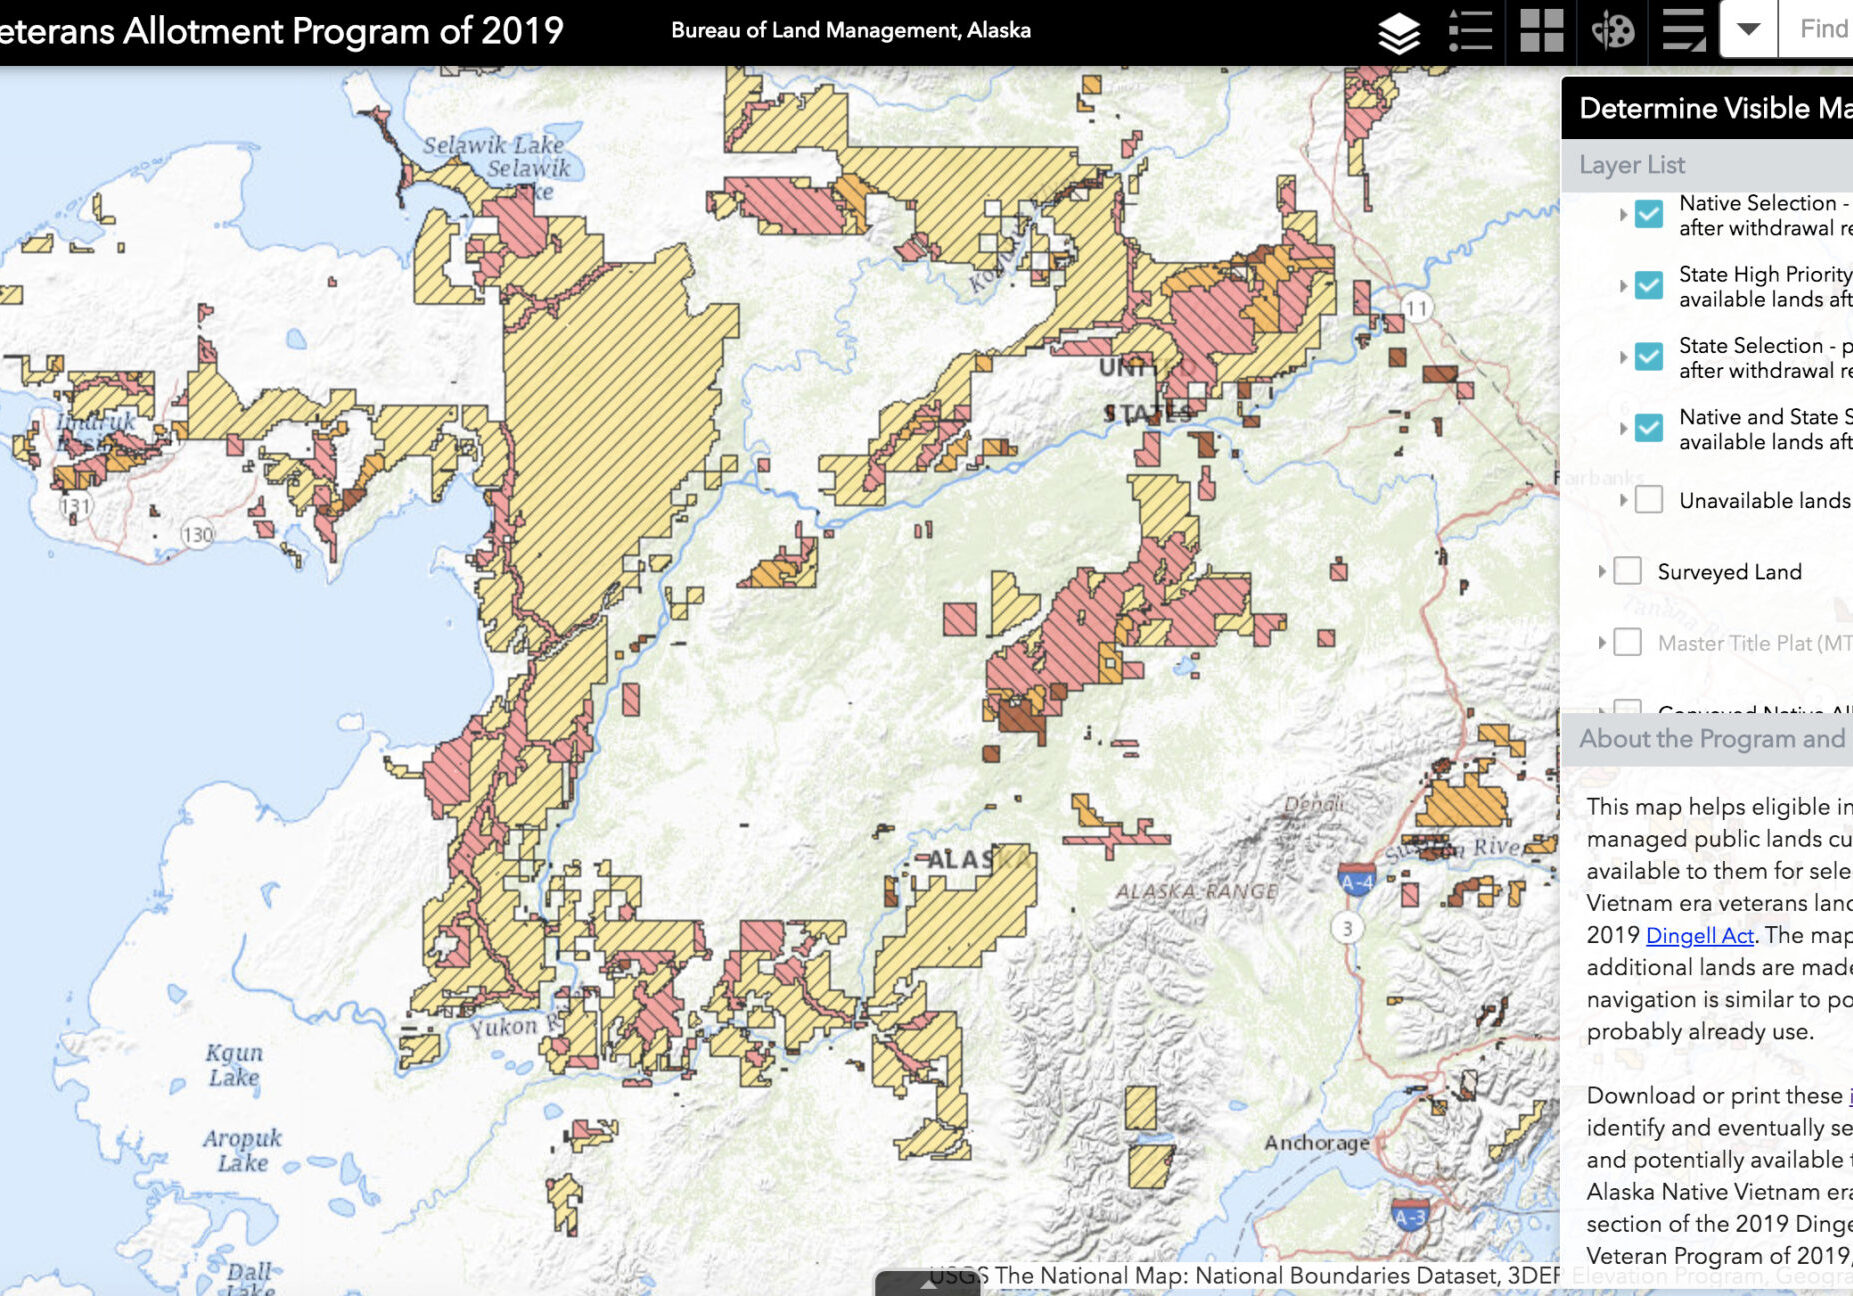 A map of the total acreage of land that will potentially be available for Alaska Native Veterans to claim through the BLM's program.
Photo: screen grab from BLM, 2020.